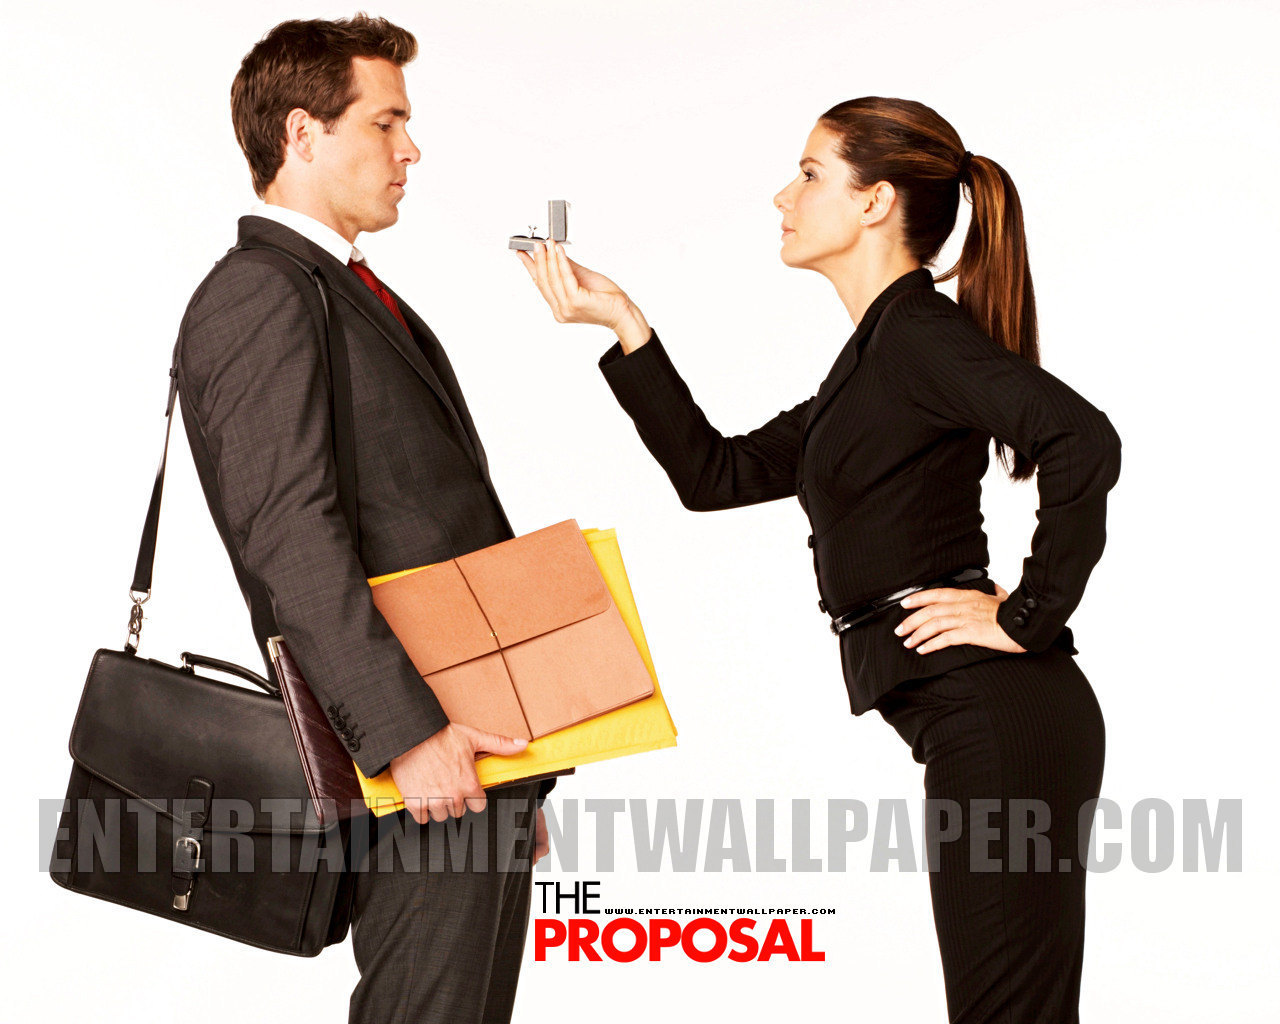 http://images2.fanpop.com/images/photos/6800000/The-Proposal-the-proposal-6858110-1280-1024.jpg